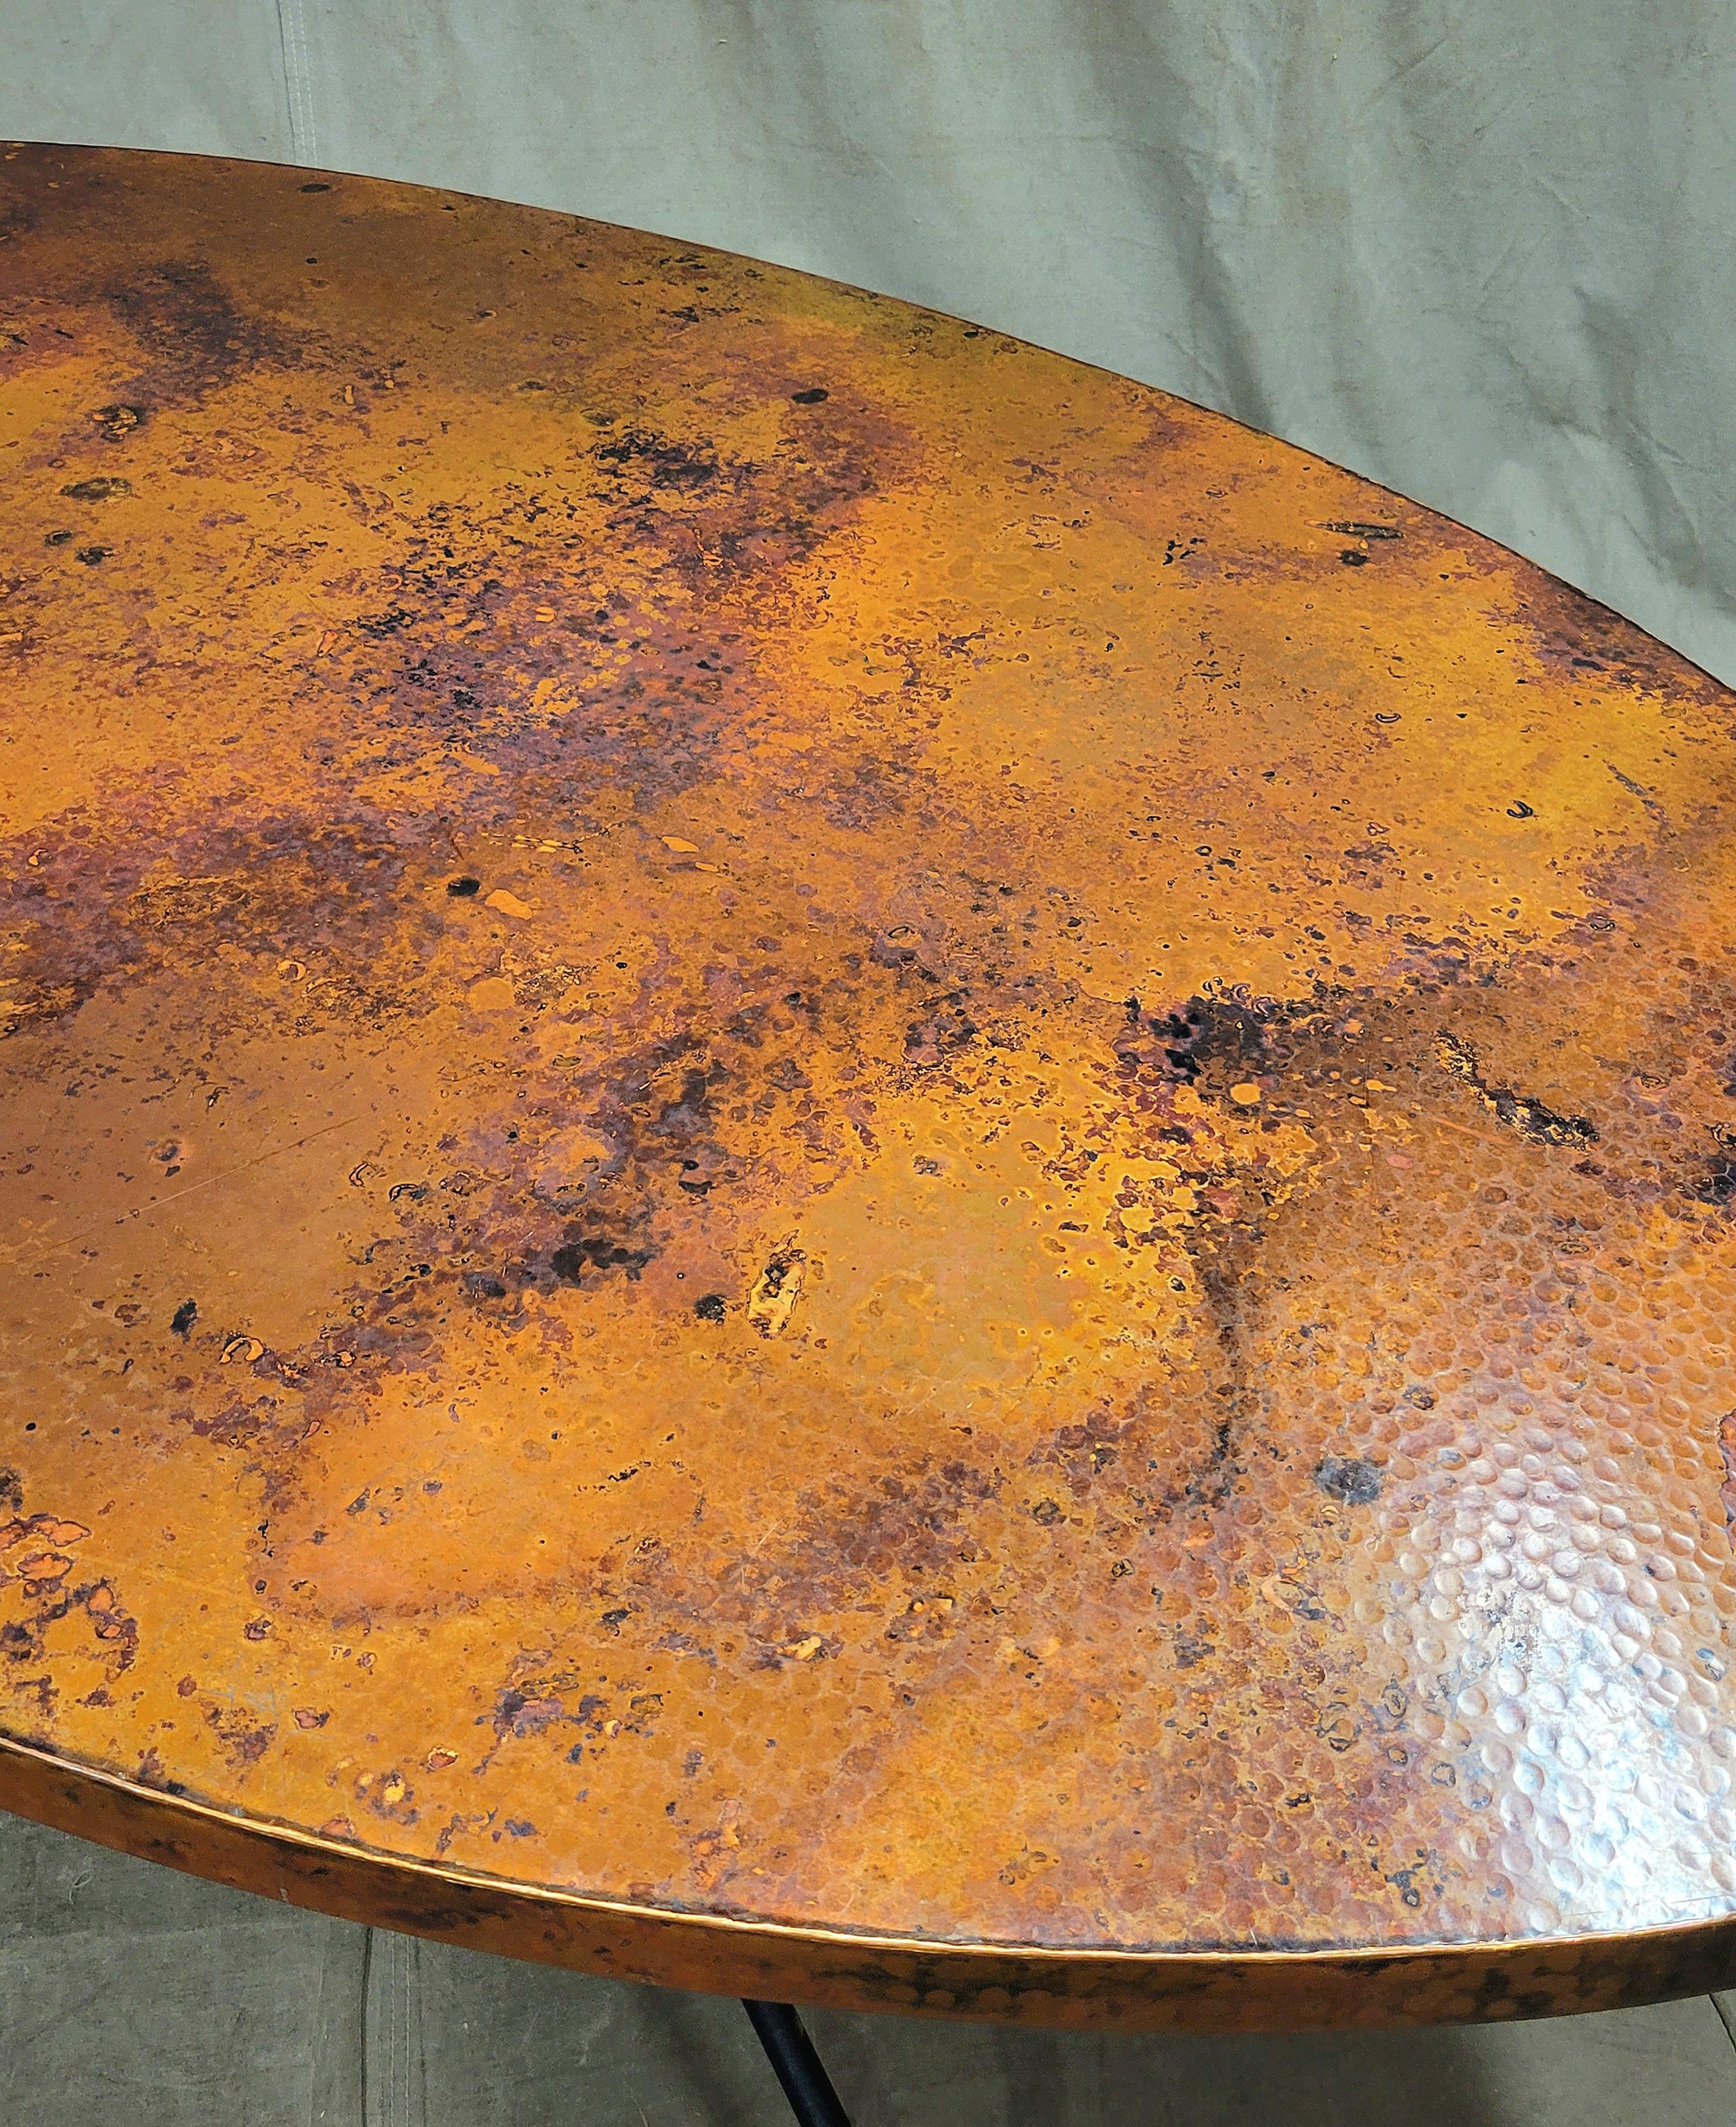 Rustic Arhaus Dining Table With Hammered Copper Top and Iron Arabesque Base